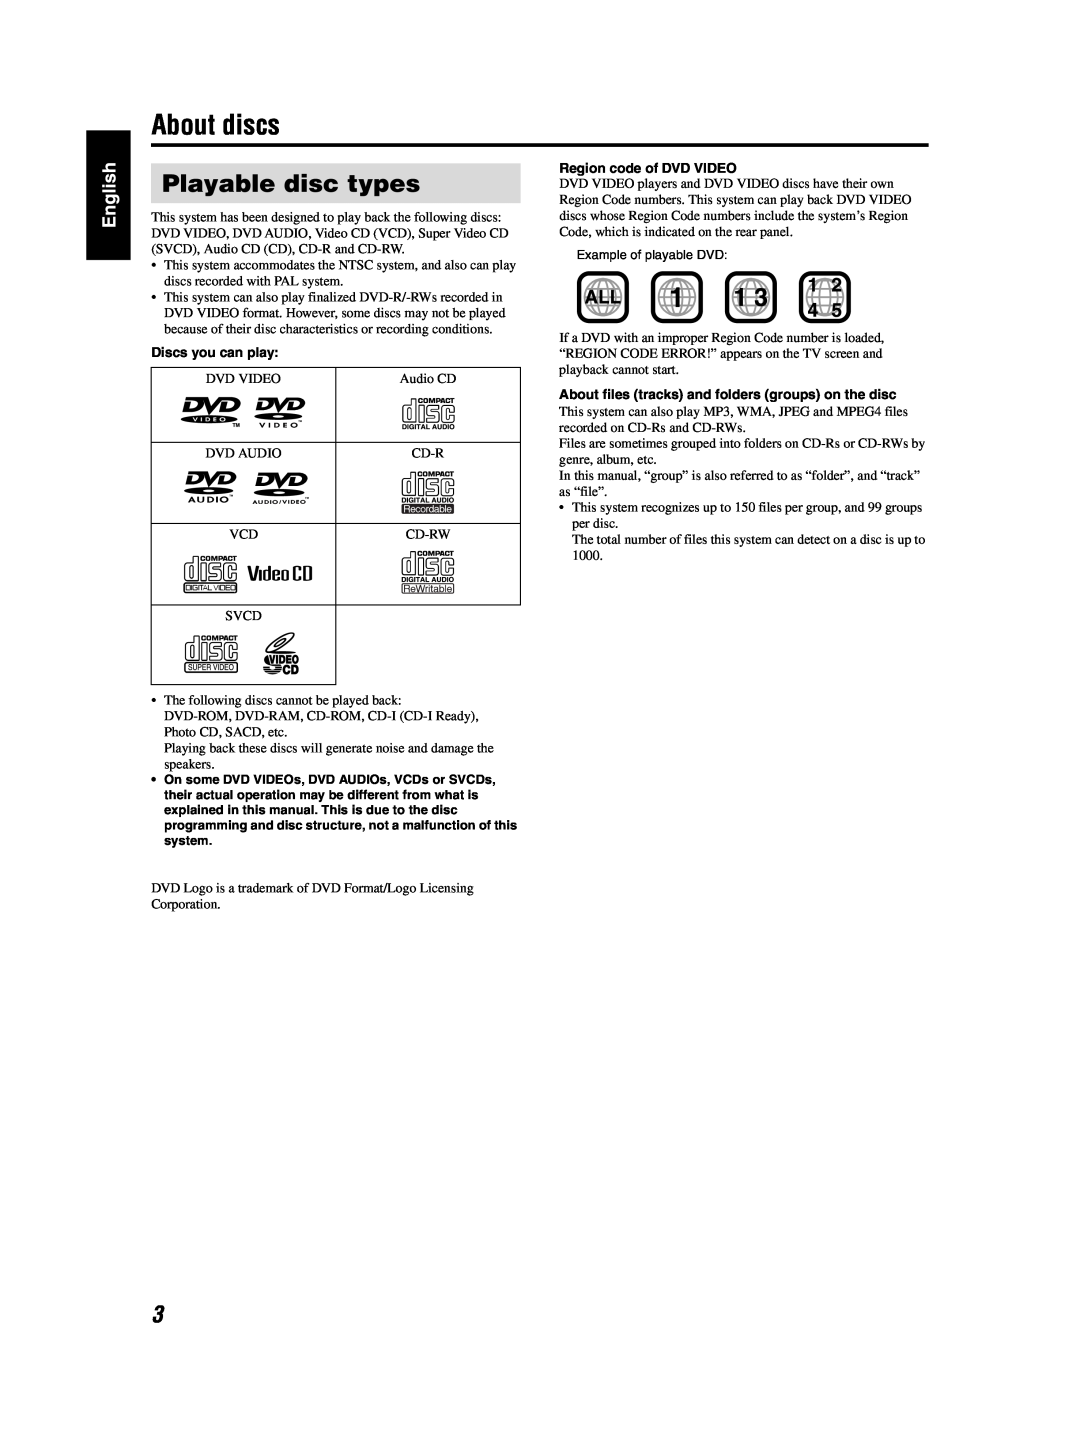 JVC TH-S3 TH-S2 manual About discs, Playable disc types, Discs you can play, Region code of DVD VIDEO 